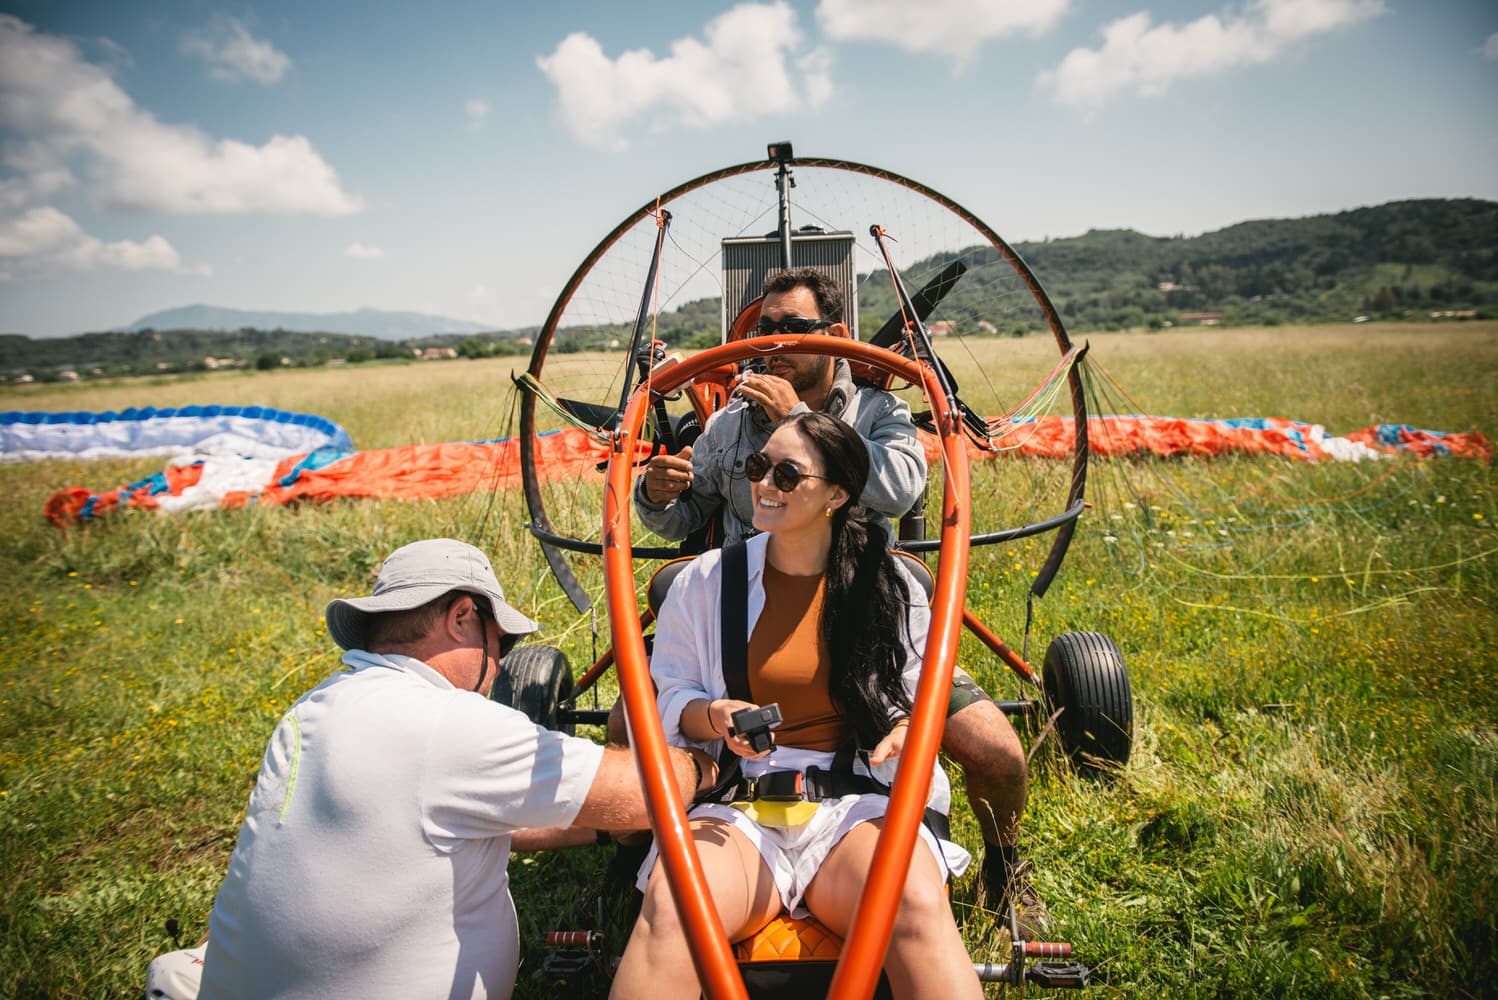 The other bride ready for her paragliding experience, capturing thrilling moments in Corfu.